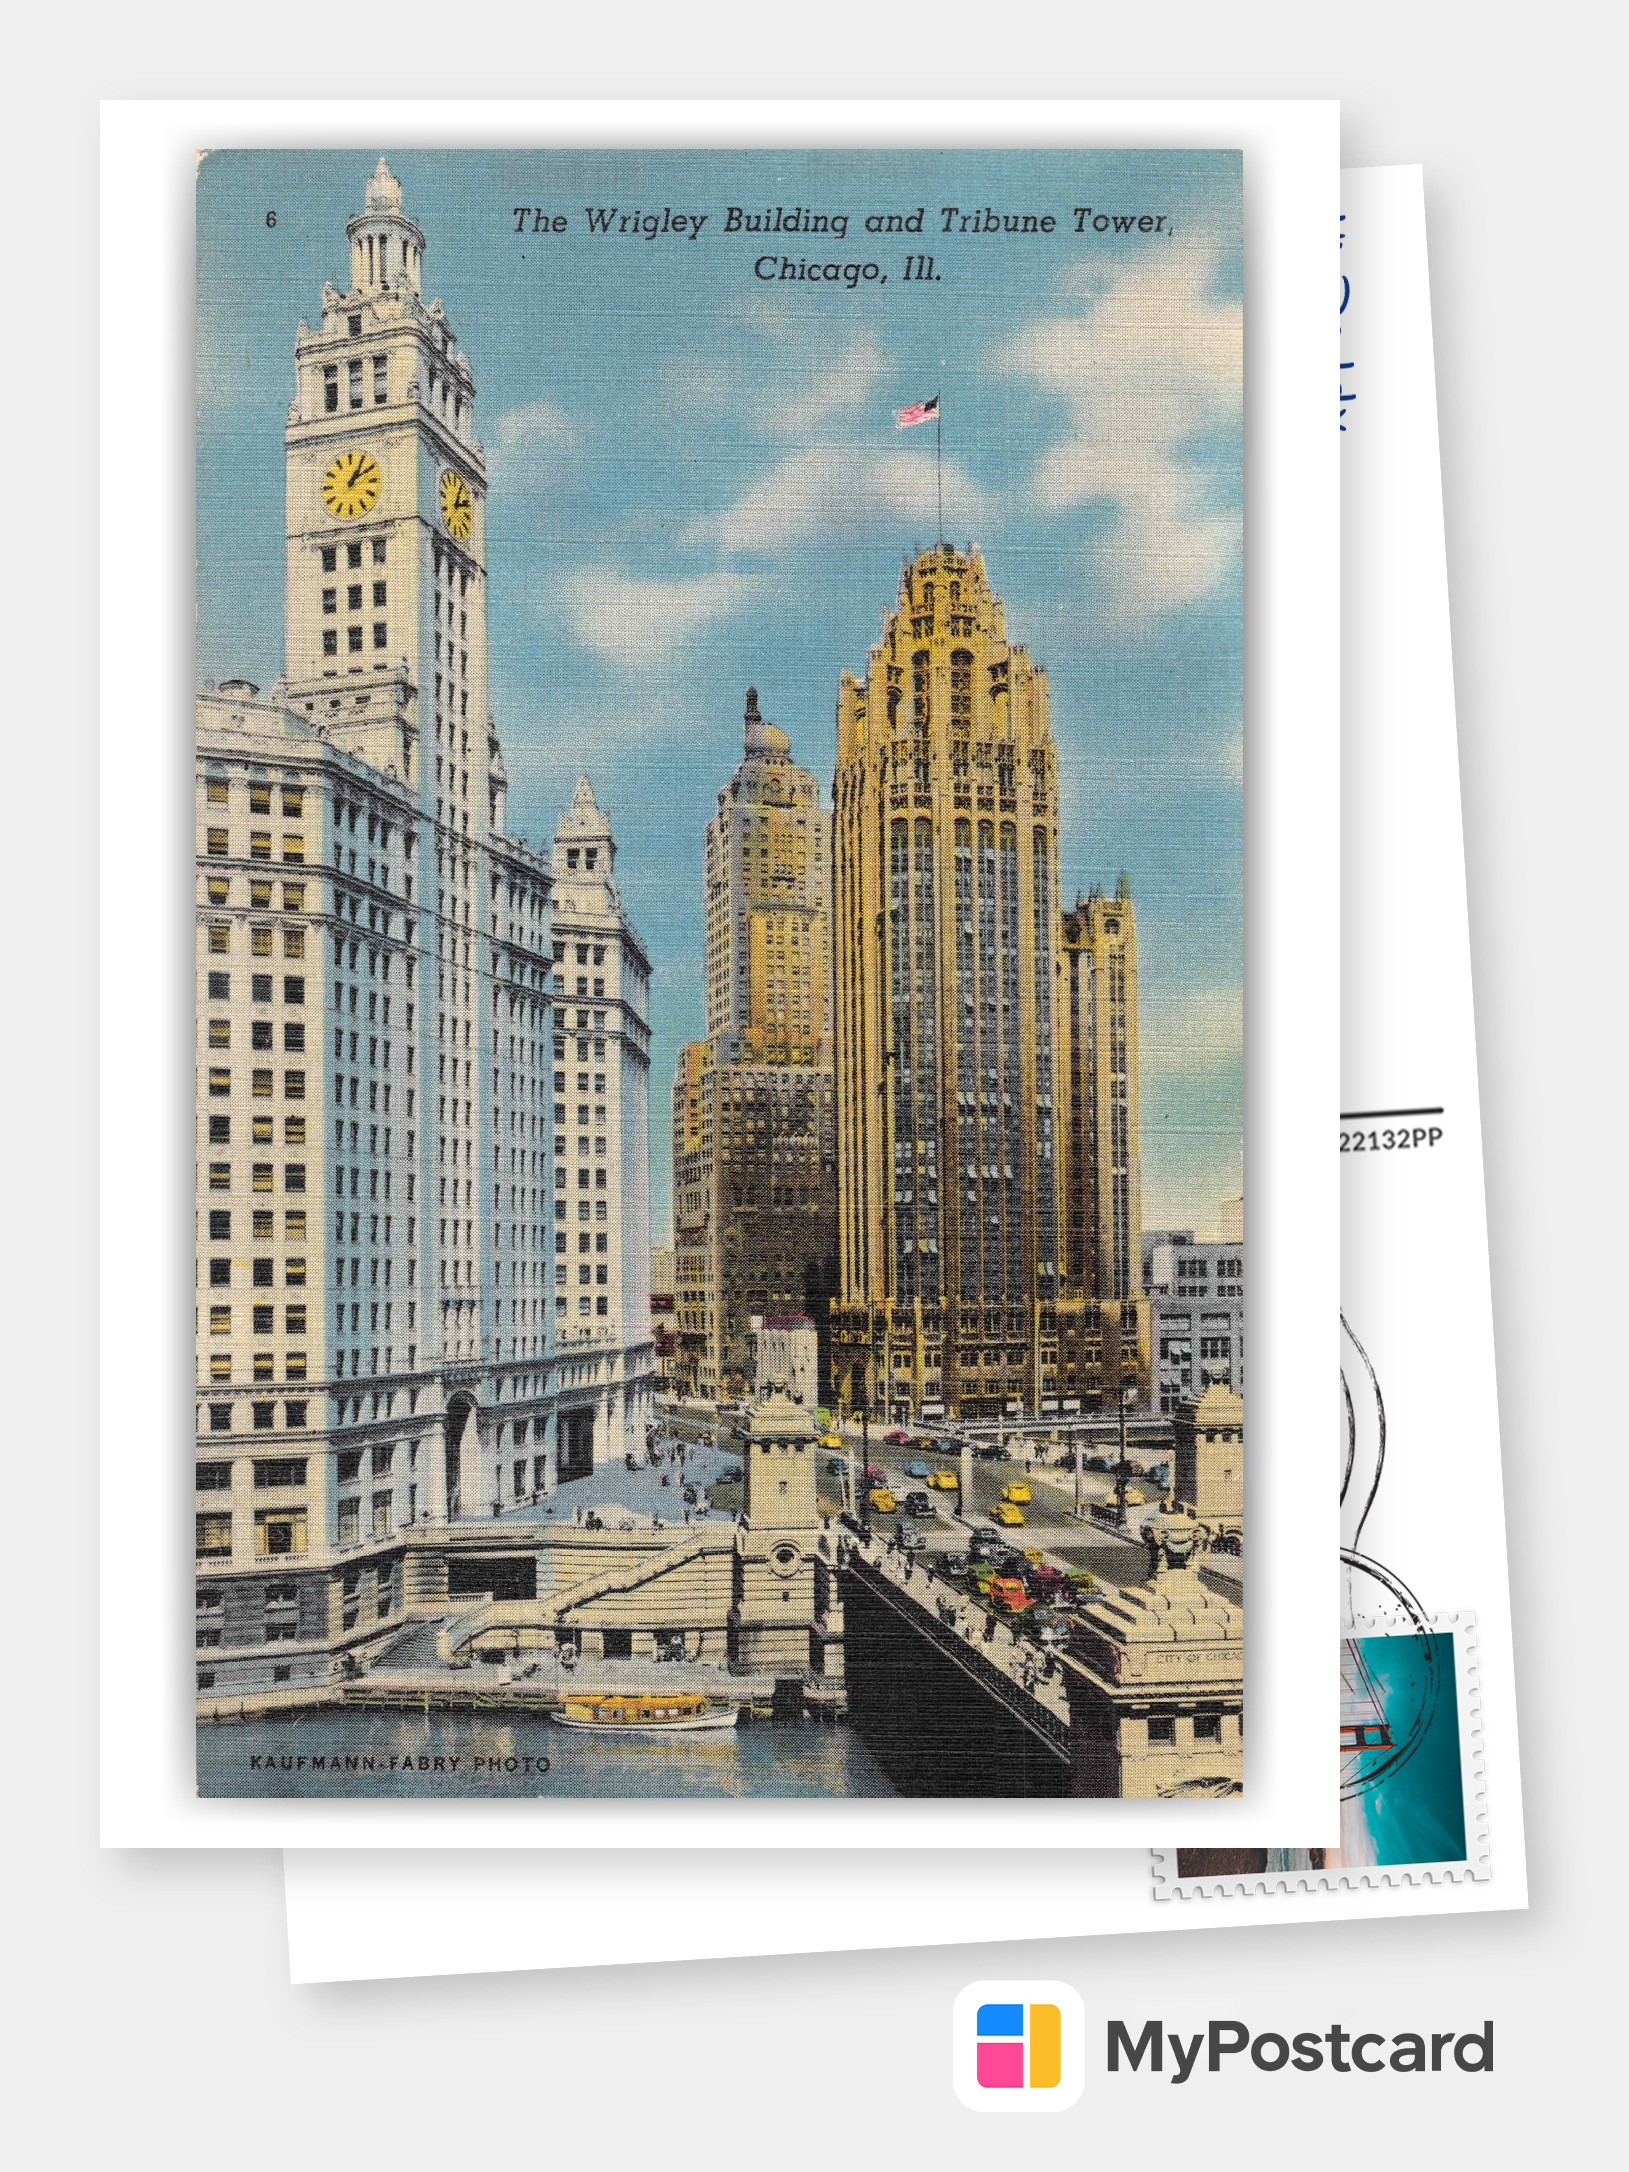 Vintage Postcard Chicago IL Daily News Building